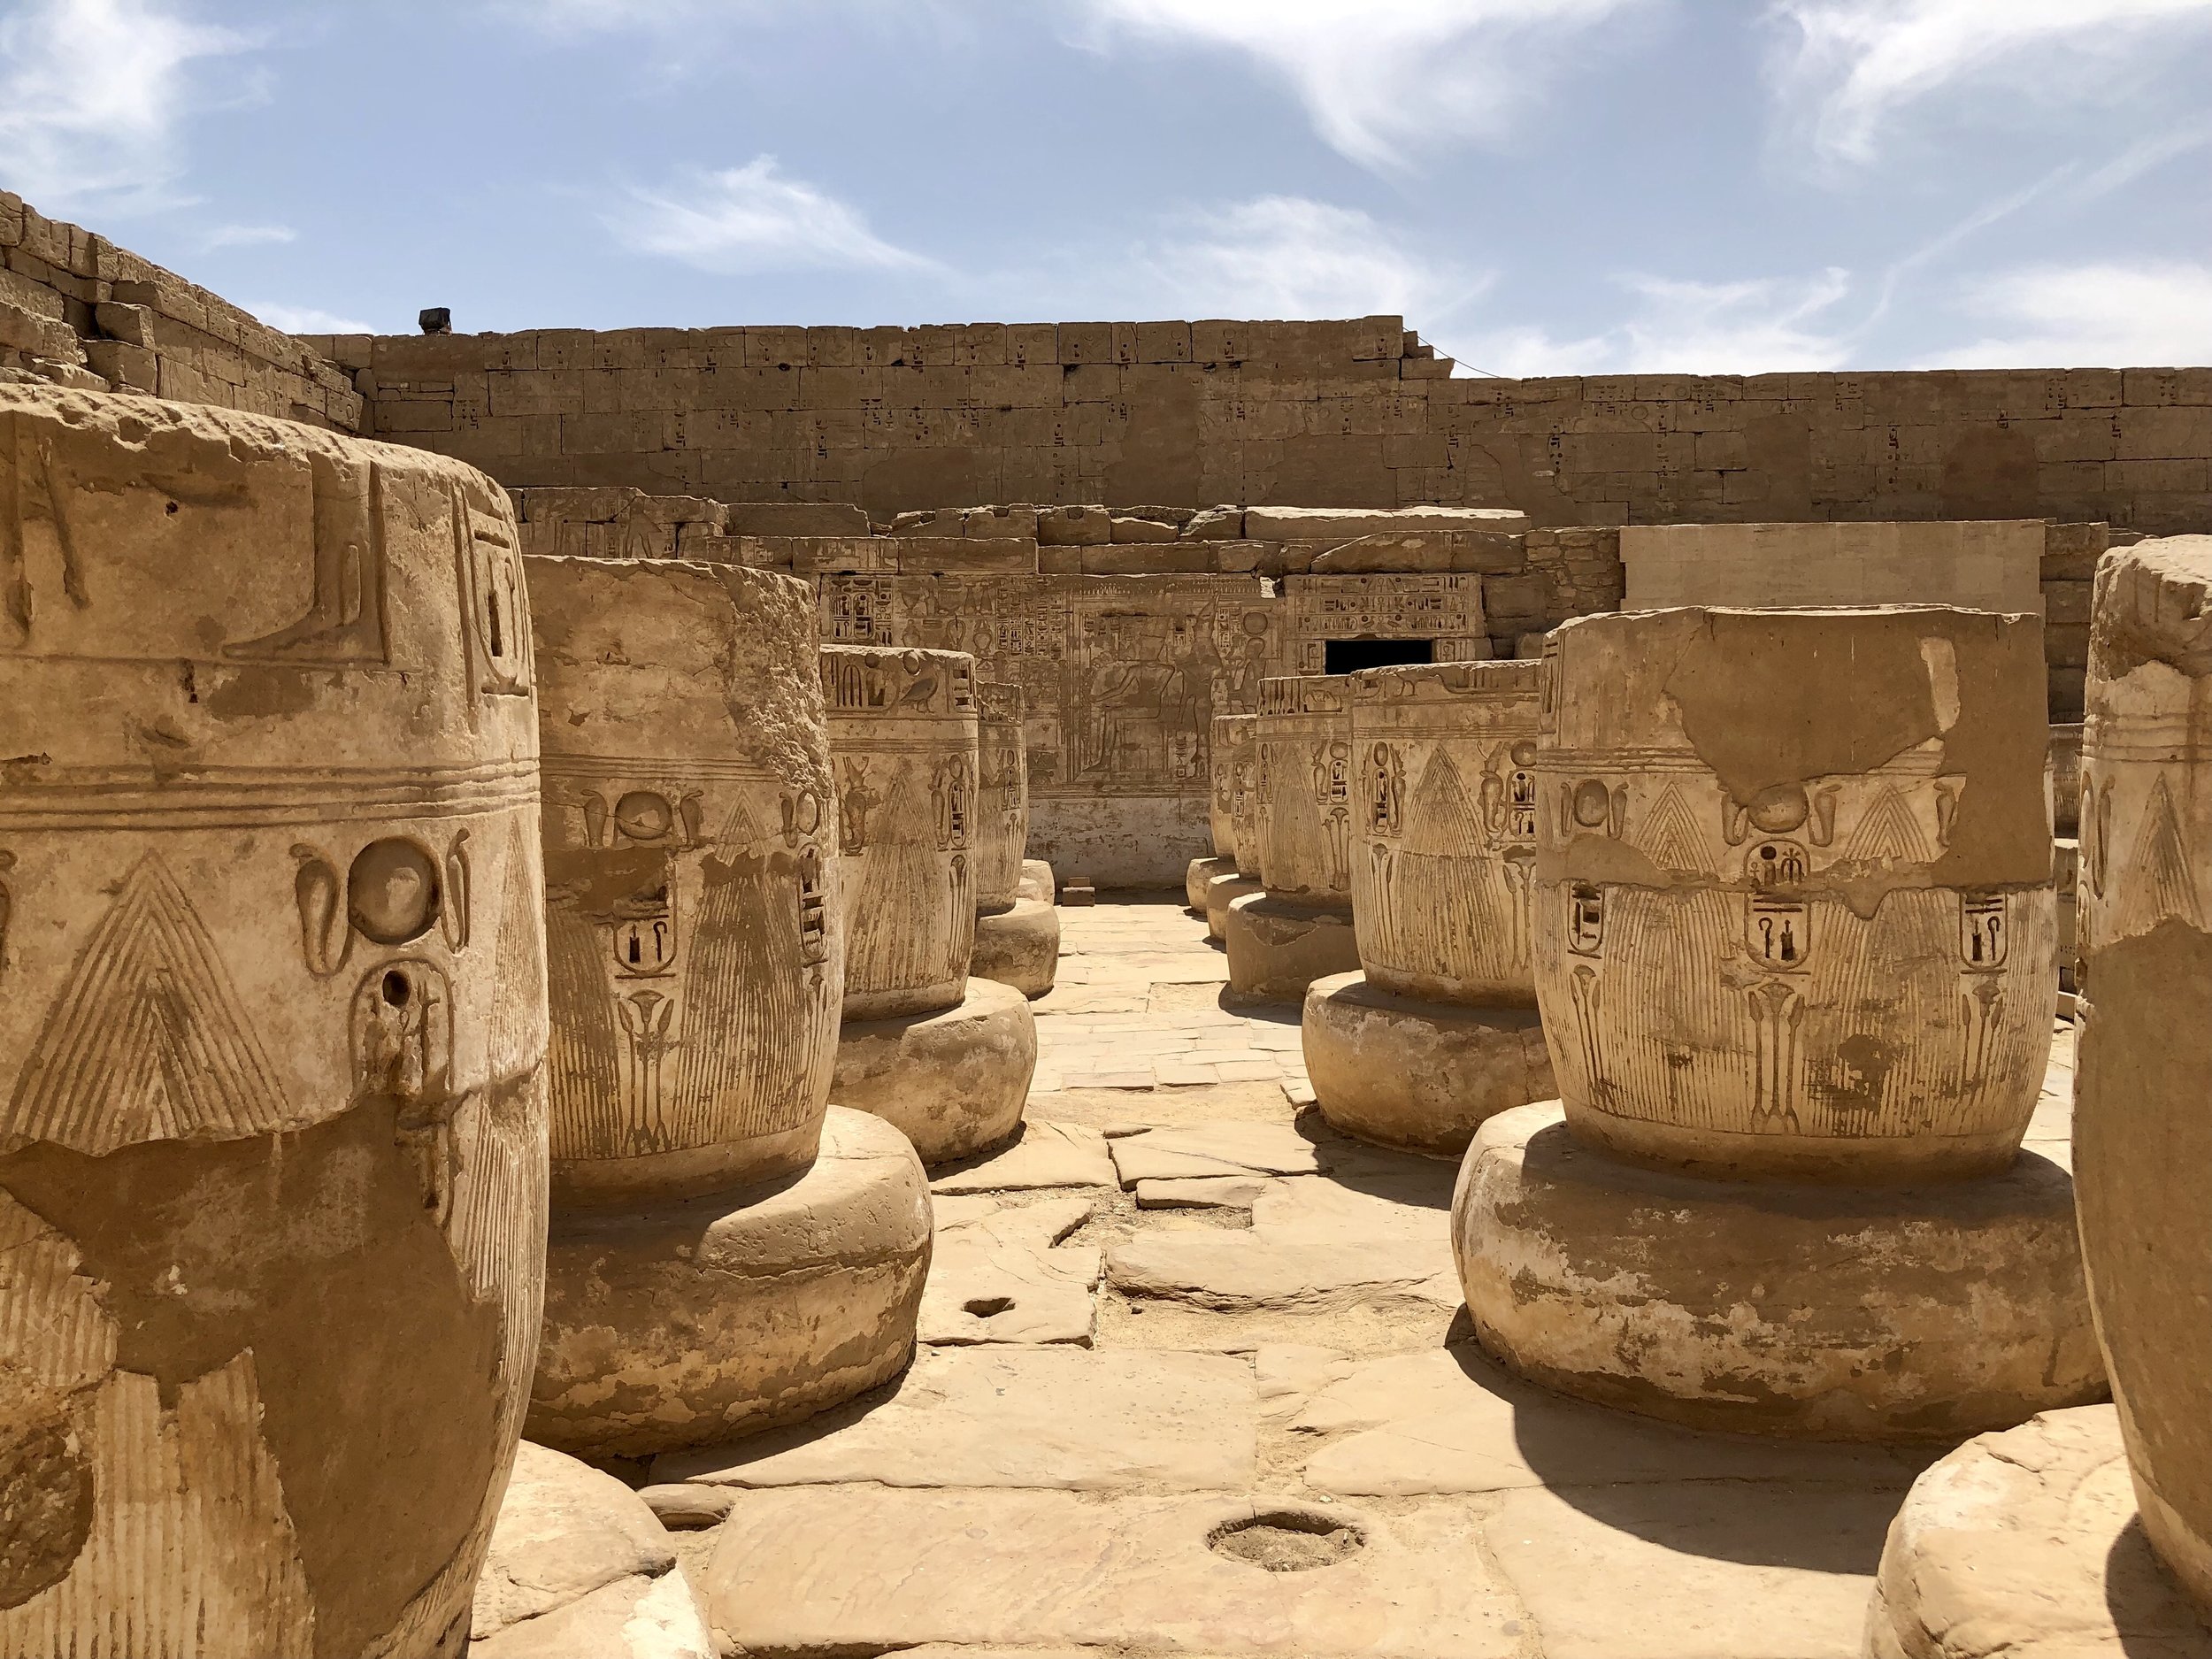 Out back is the Great Hypostyle Hall, modeled after Karnak’s — again Ramesses III gained inspiration from his father, Ramesses II